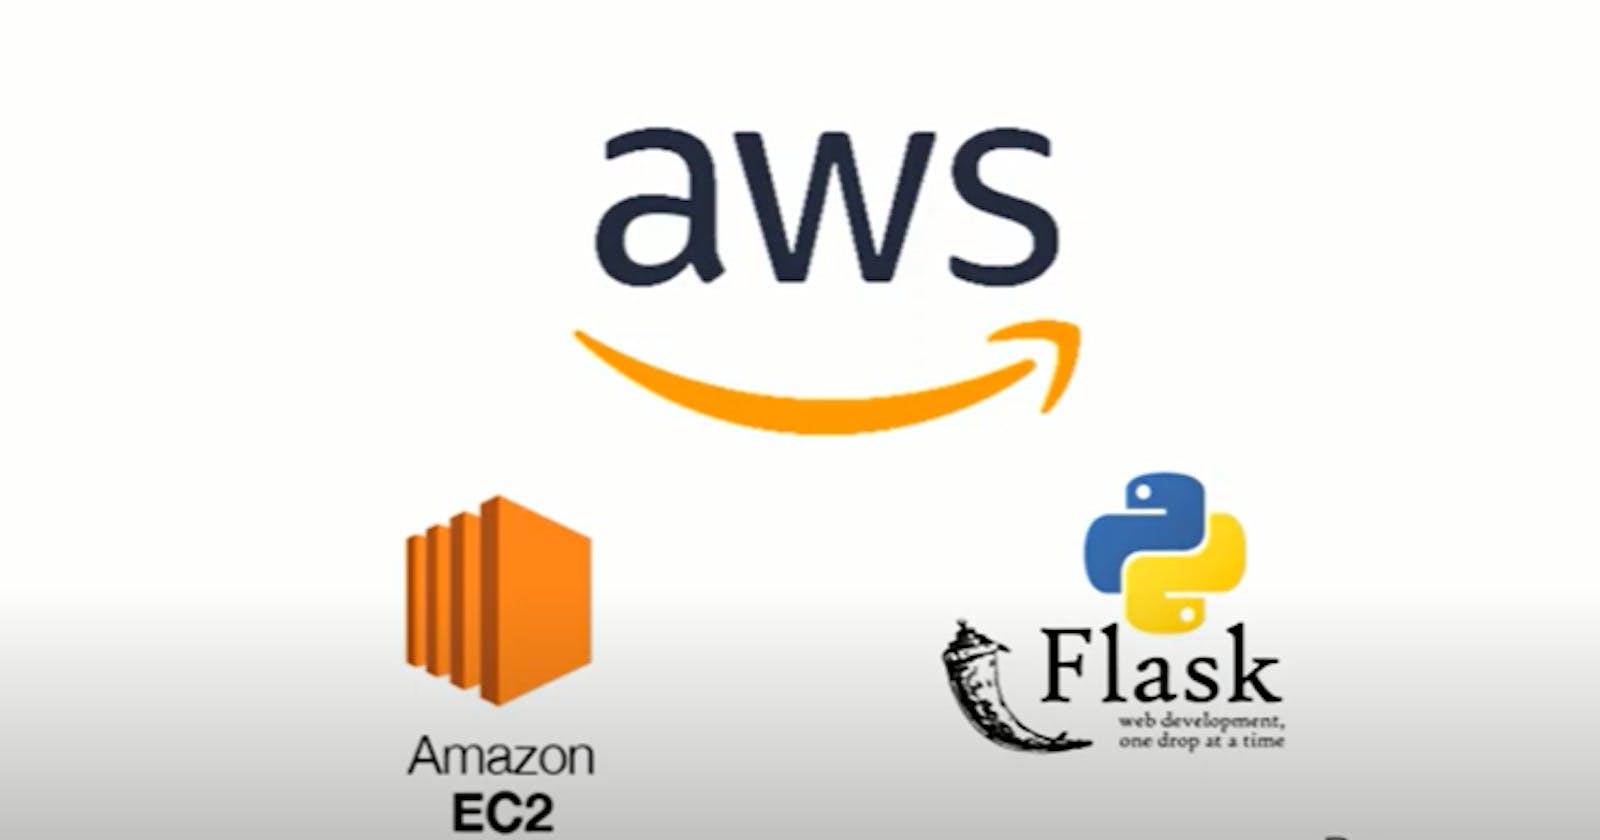 Step by step guide to deploying ML models on Flask web application with AWS EC2 Instance.